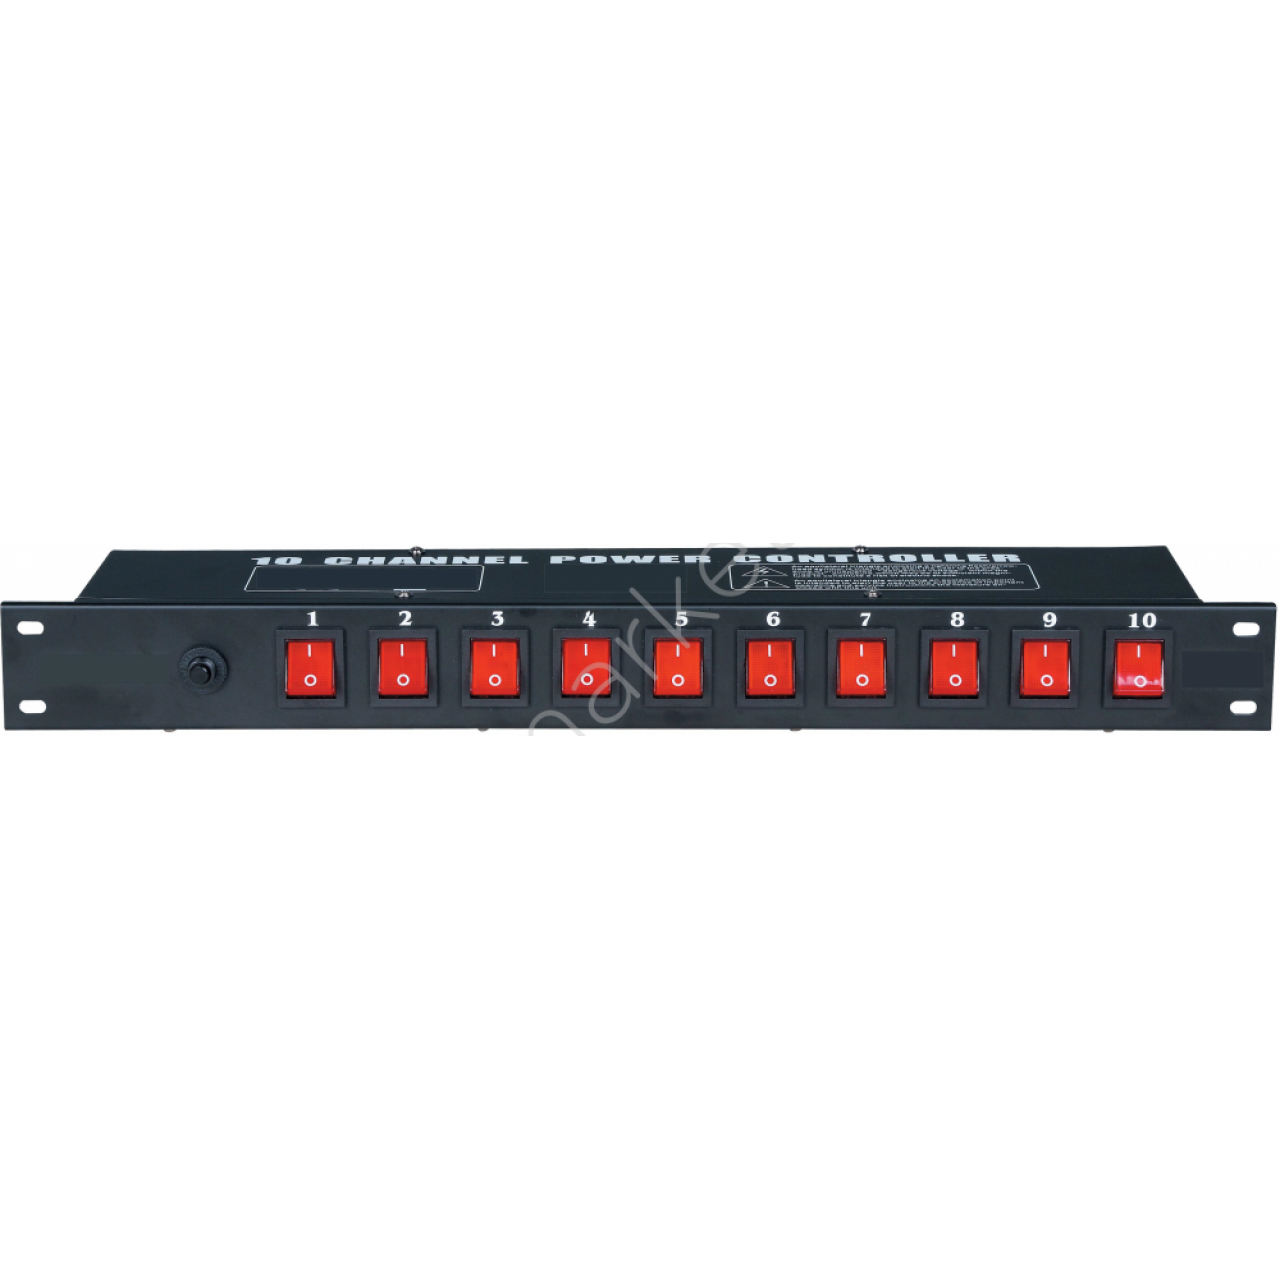 IMPES SN152, 10 CH Switch Box